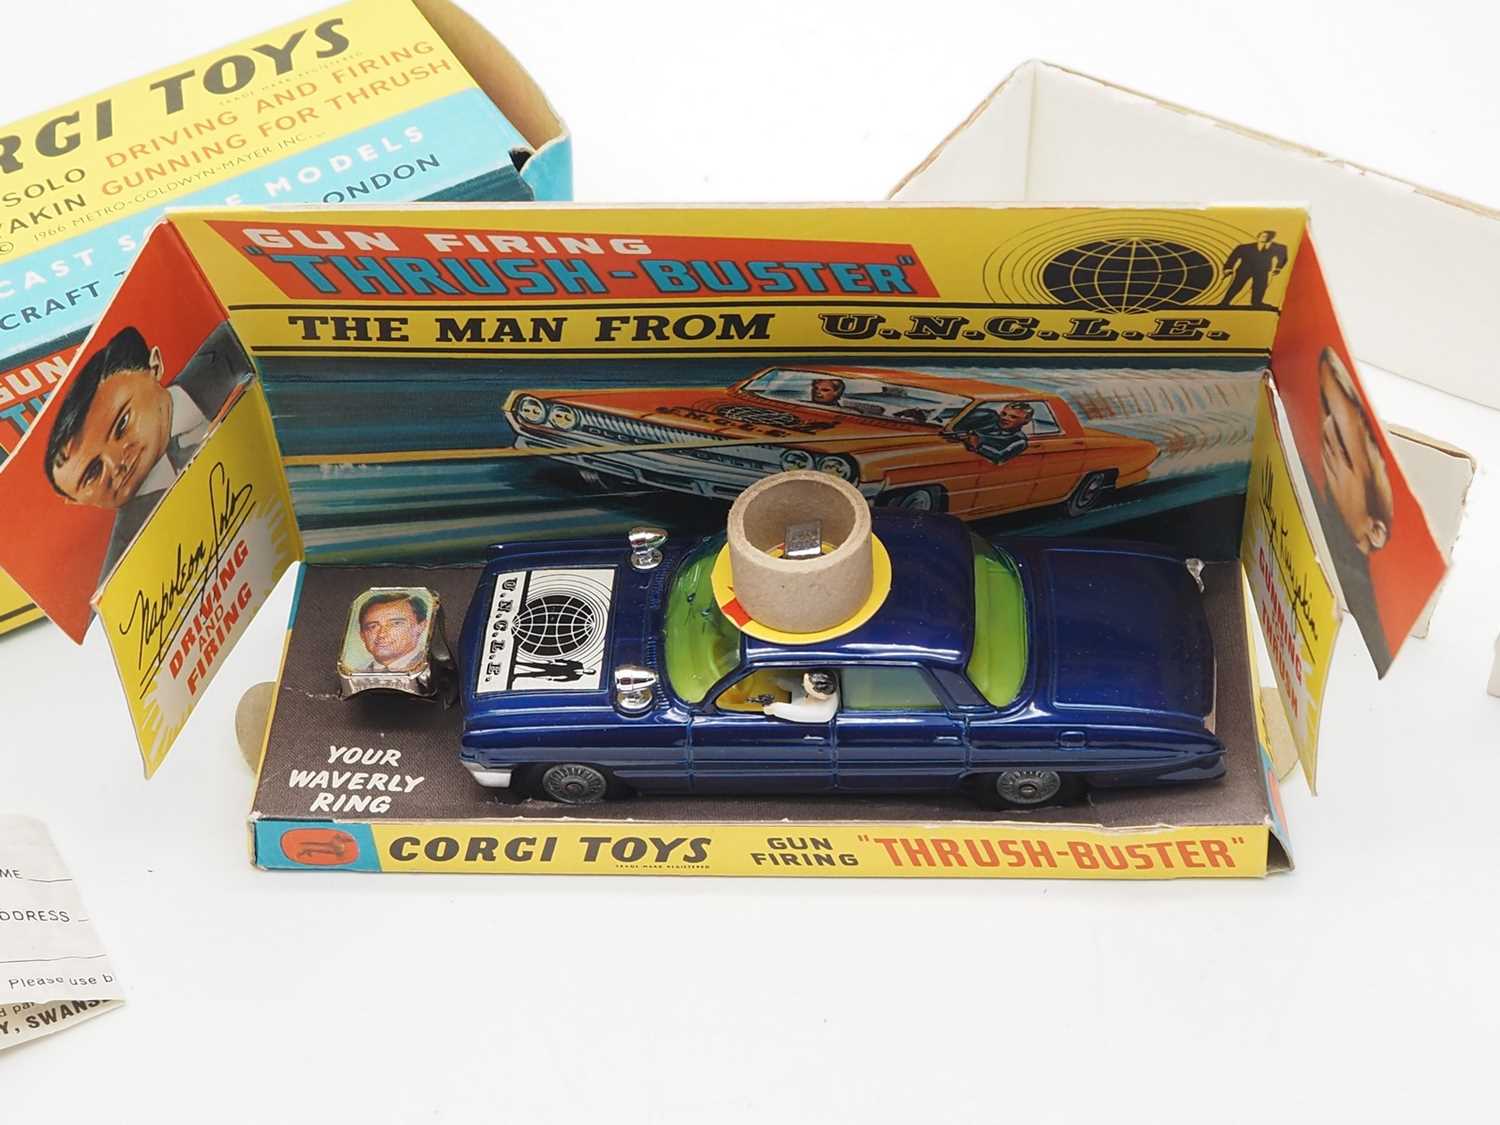 A CORGI 497 diecast Thrush-Buster Oldsmobile from 'The Man From U.N.C.L.E' - blue metallic version - - Image 2 of 9